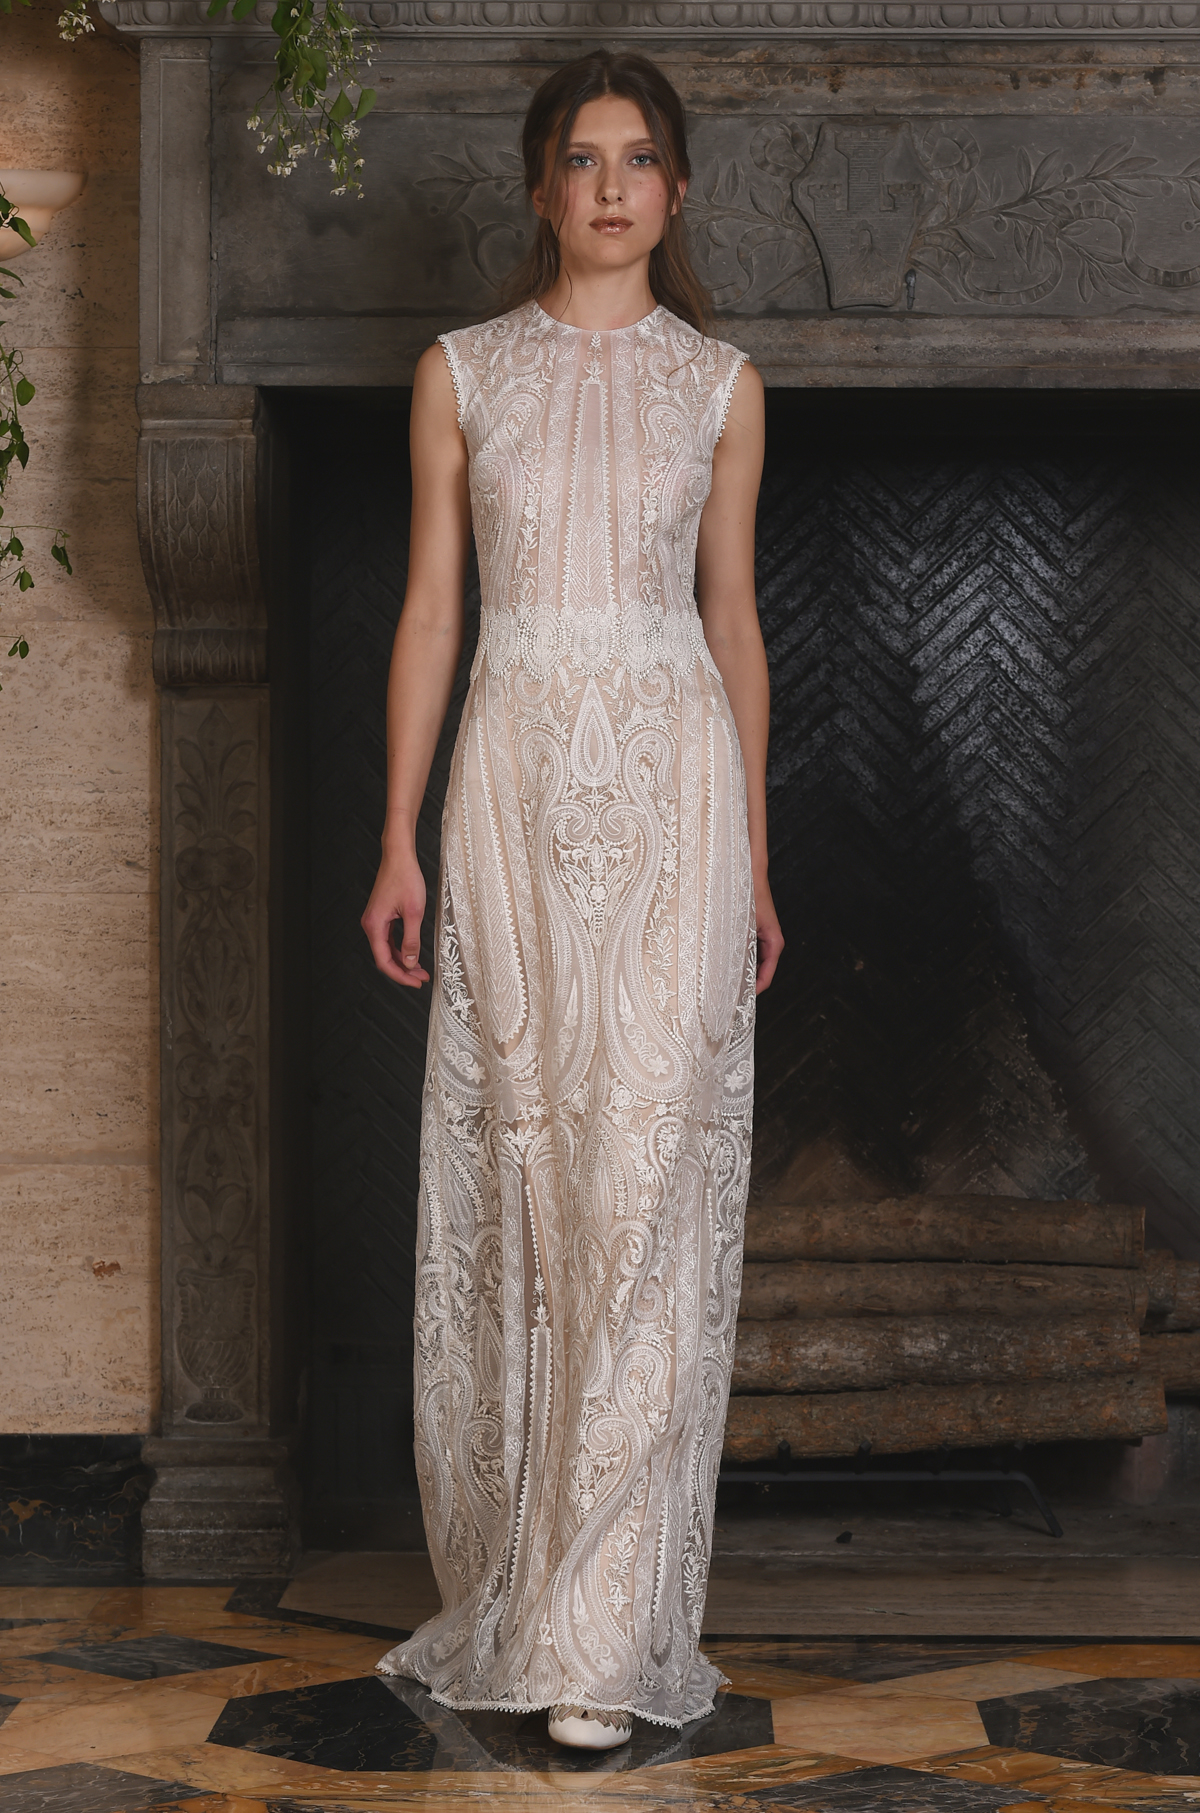 The Solstice gown, from Claire Pettibone's 'The Four Seasons' bridal couture collection for 2017.